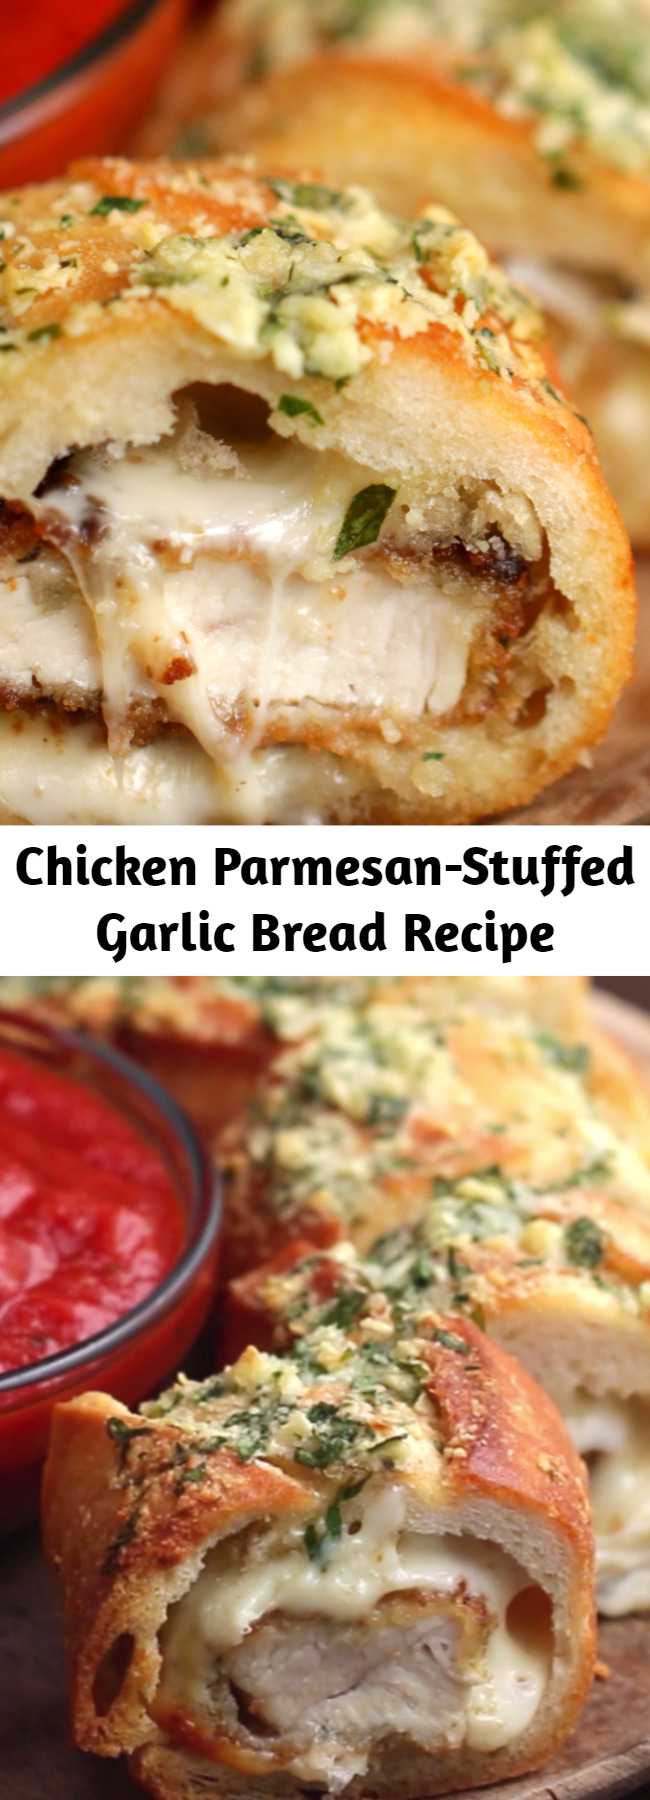 Chicken Parmesan-Stuffed Garlic Bread Recipe - Super easy to stuff the bread just make sure you get a big baguette and not a little one. Loved it!